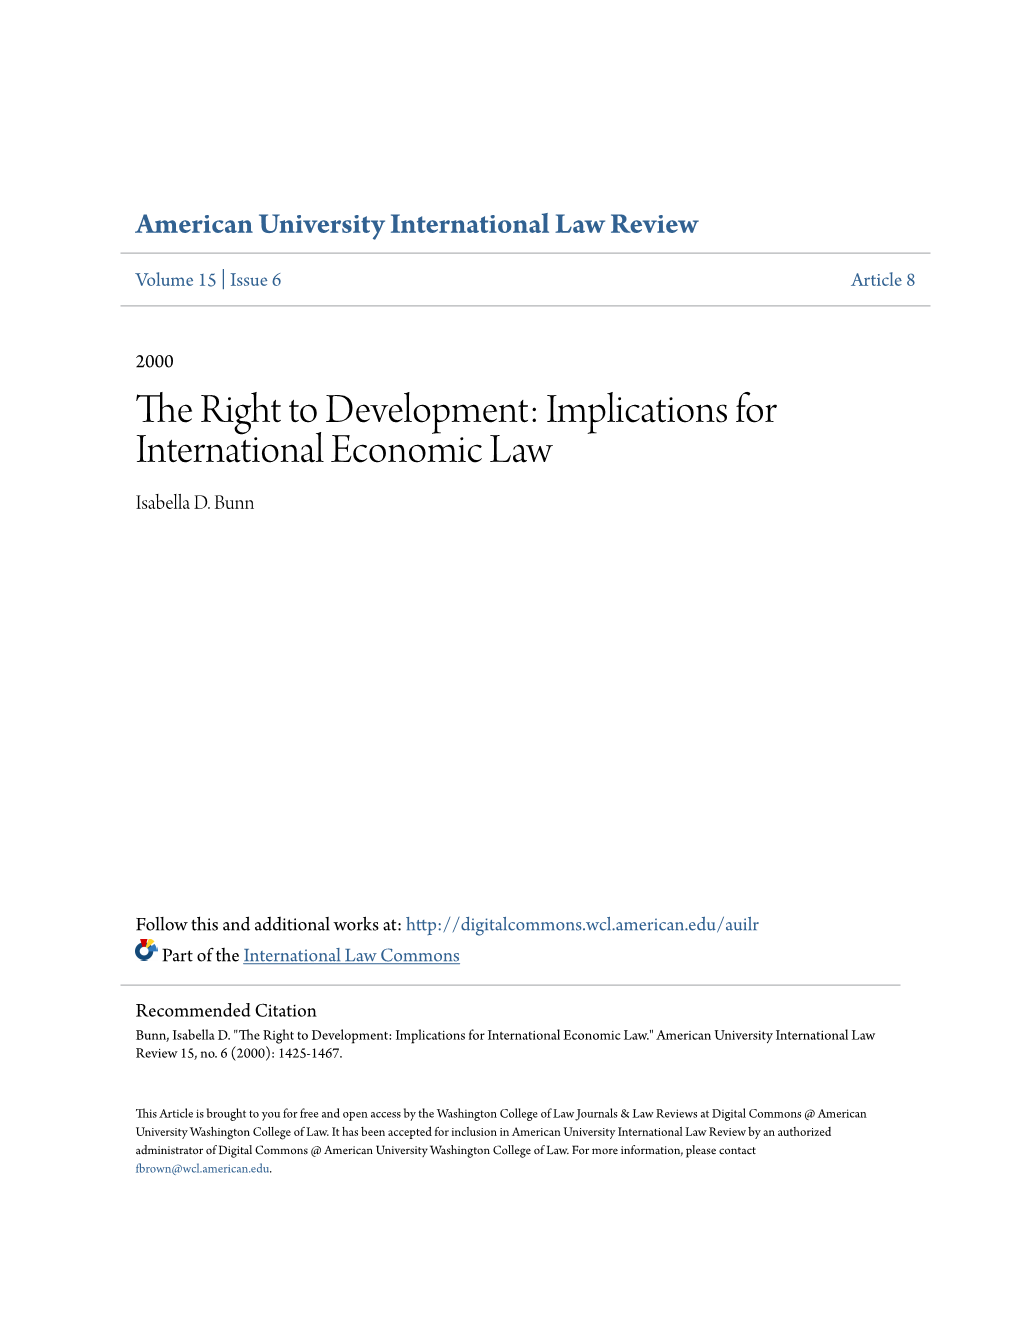 Implications for International Economic Law Isabella D